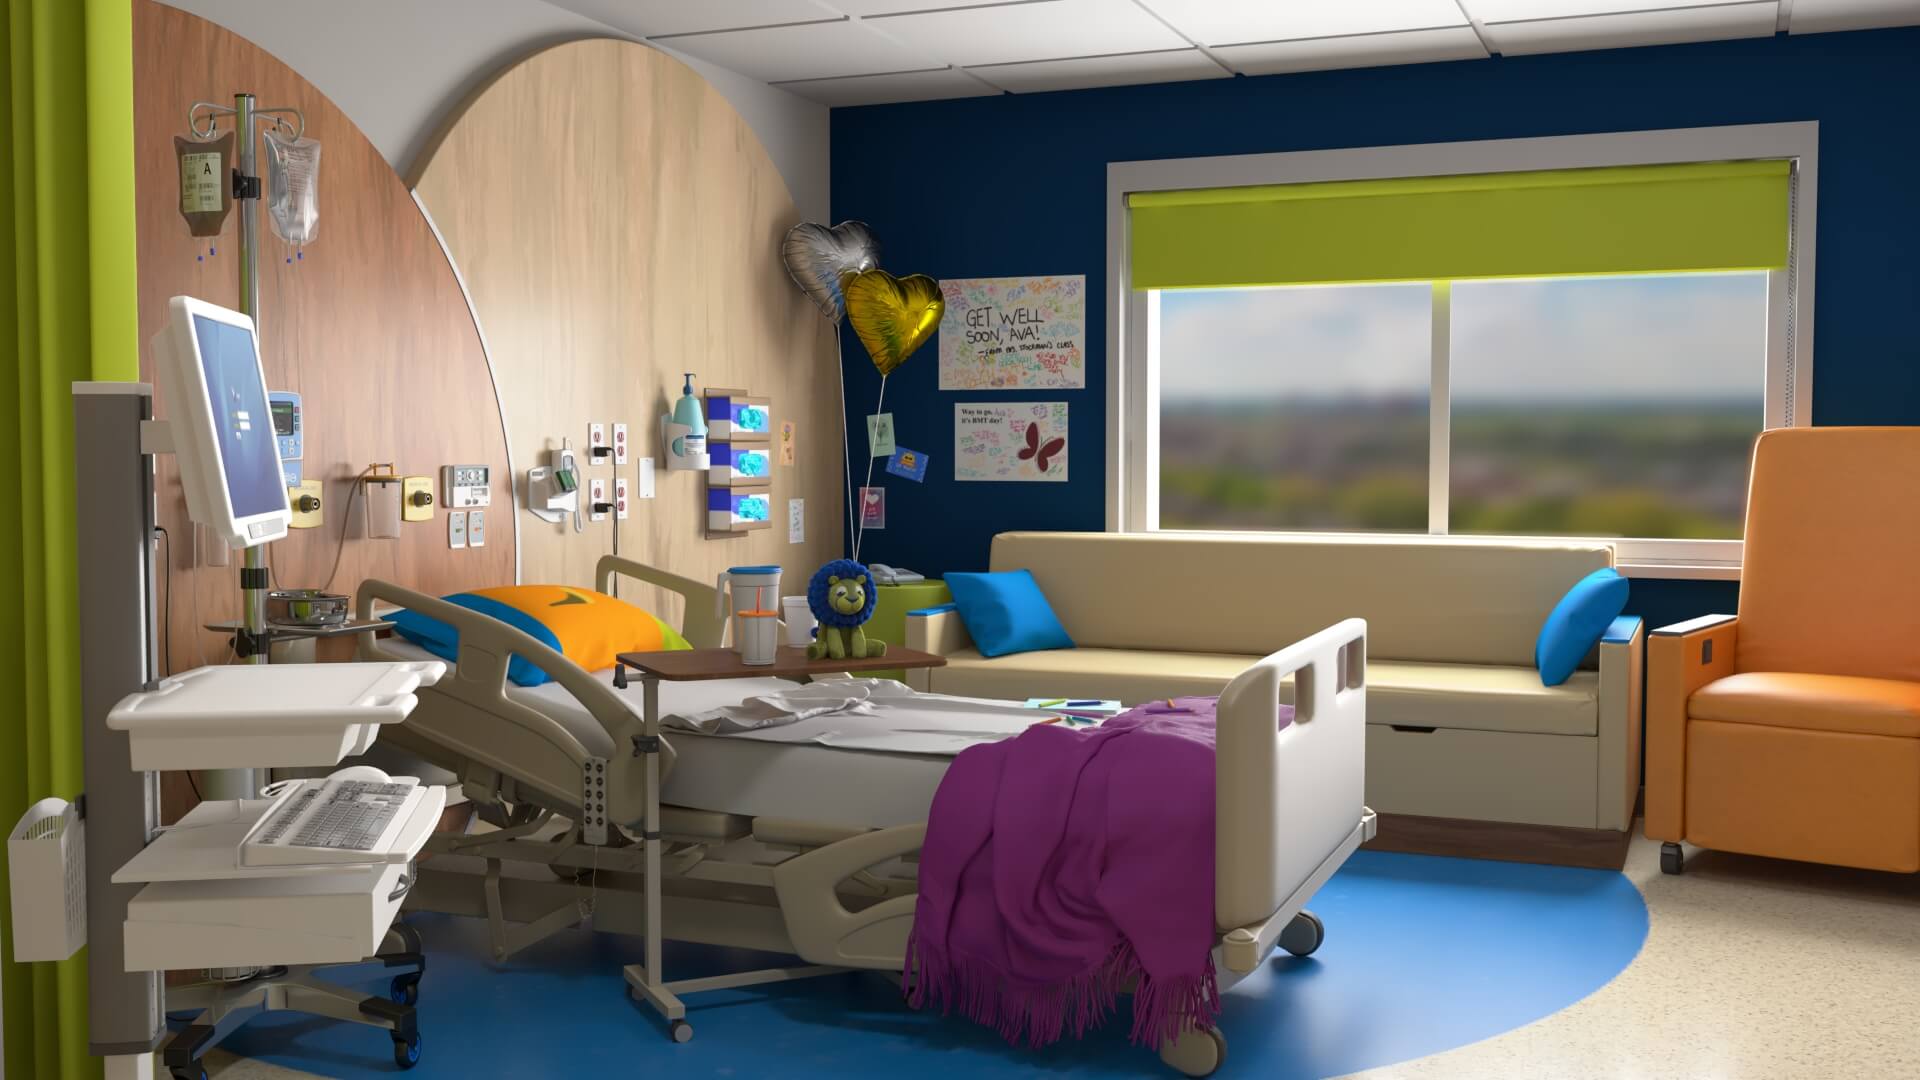 Be The Match 3D hospital room